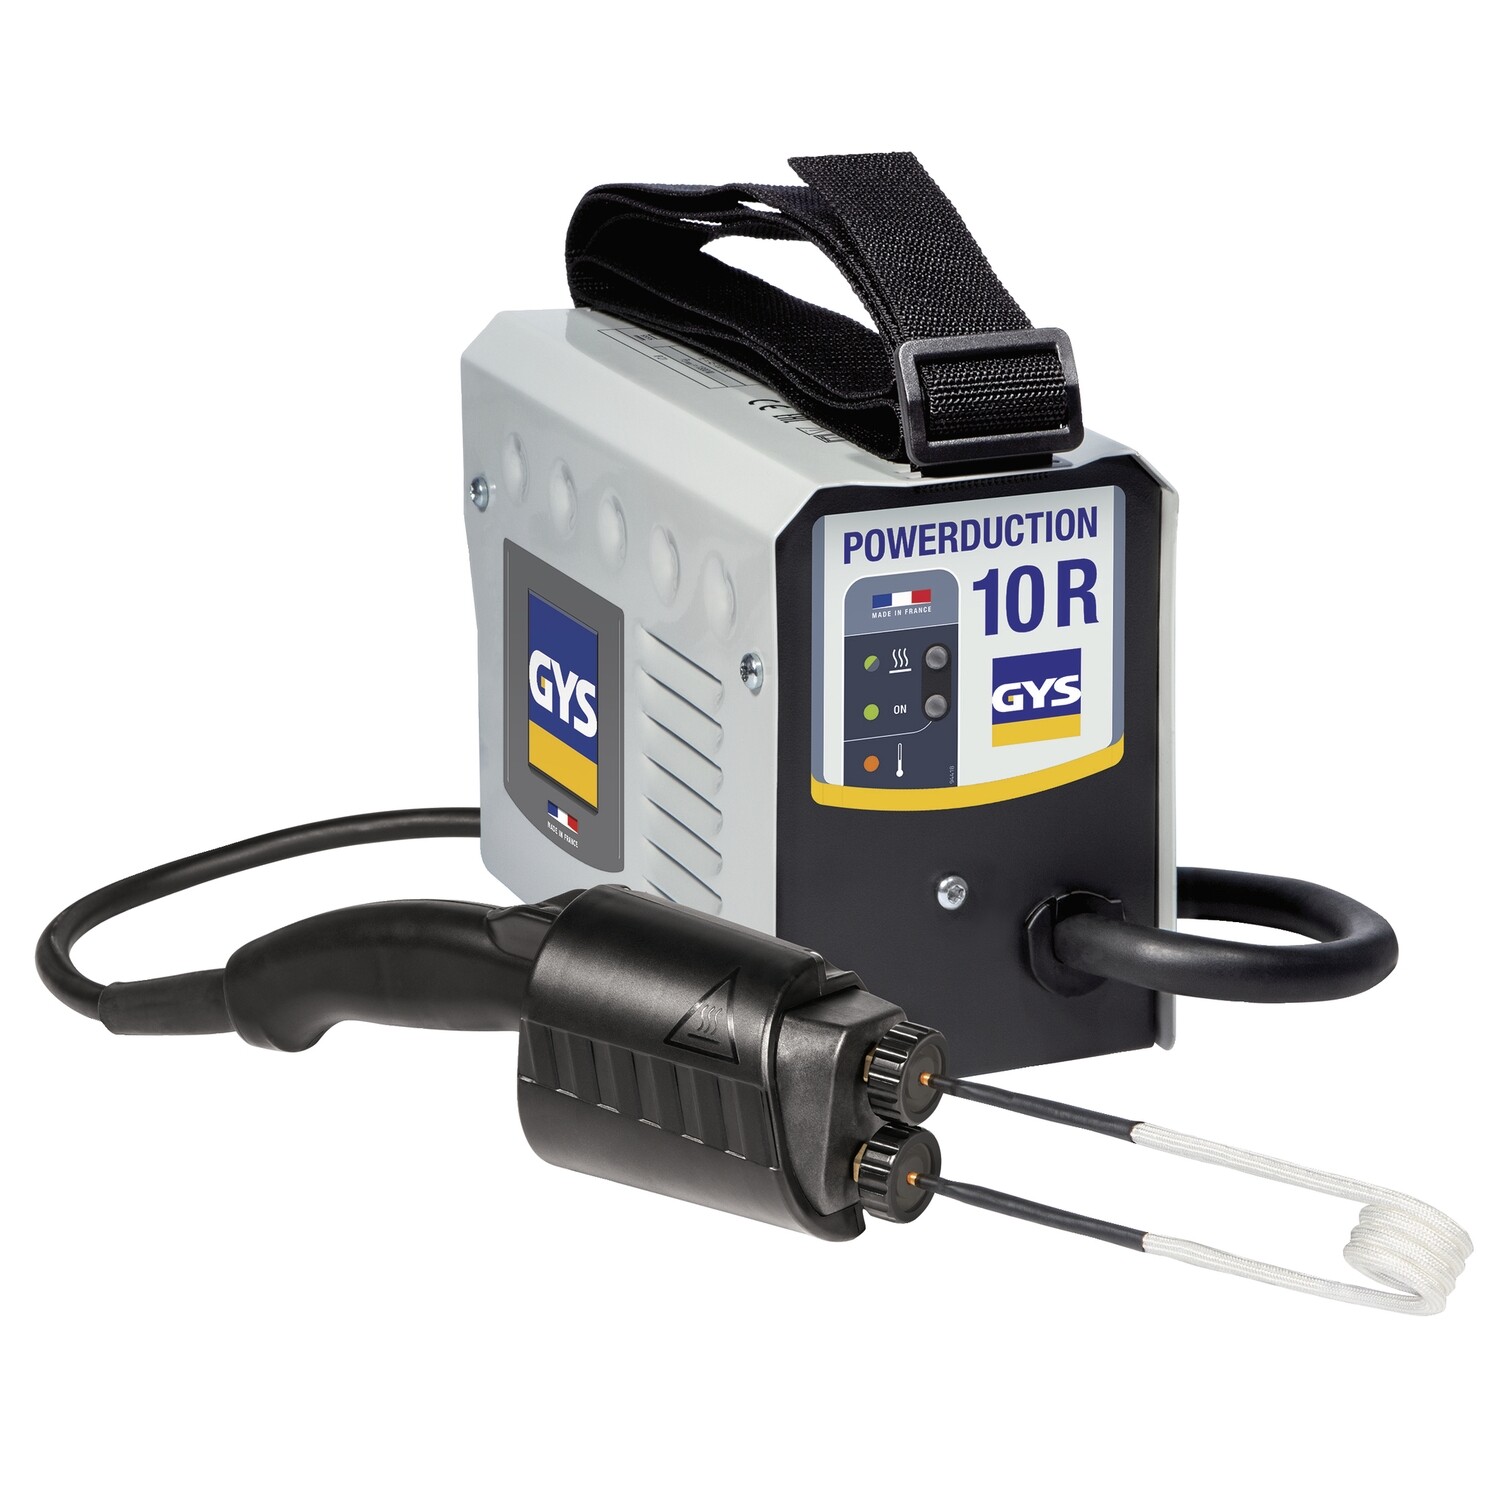 GYS Powerduction 10R Induction Heater, UK Version - 230v